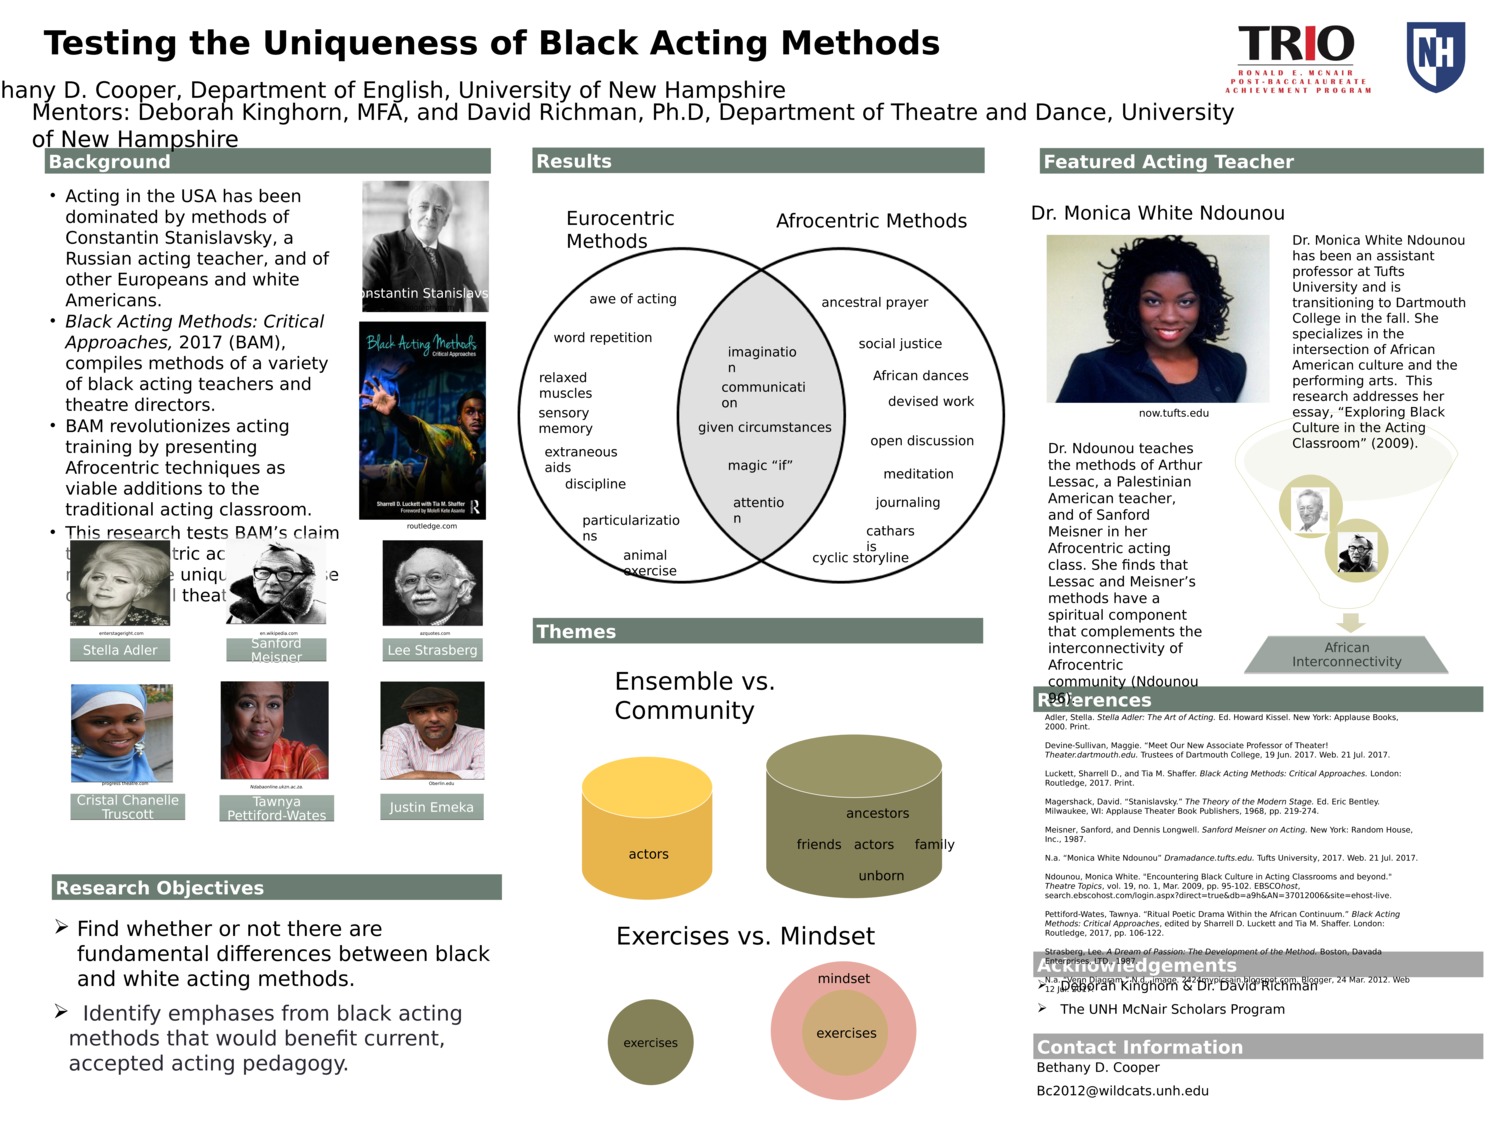 Testing The Uniqueness Of Black Acting Methods by bc2012